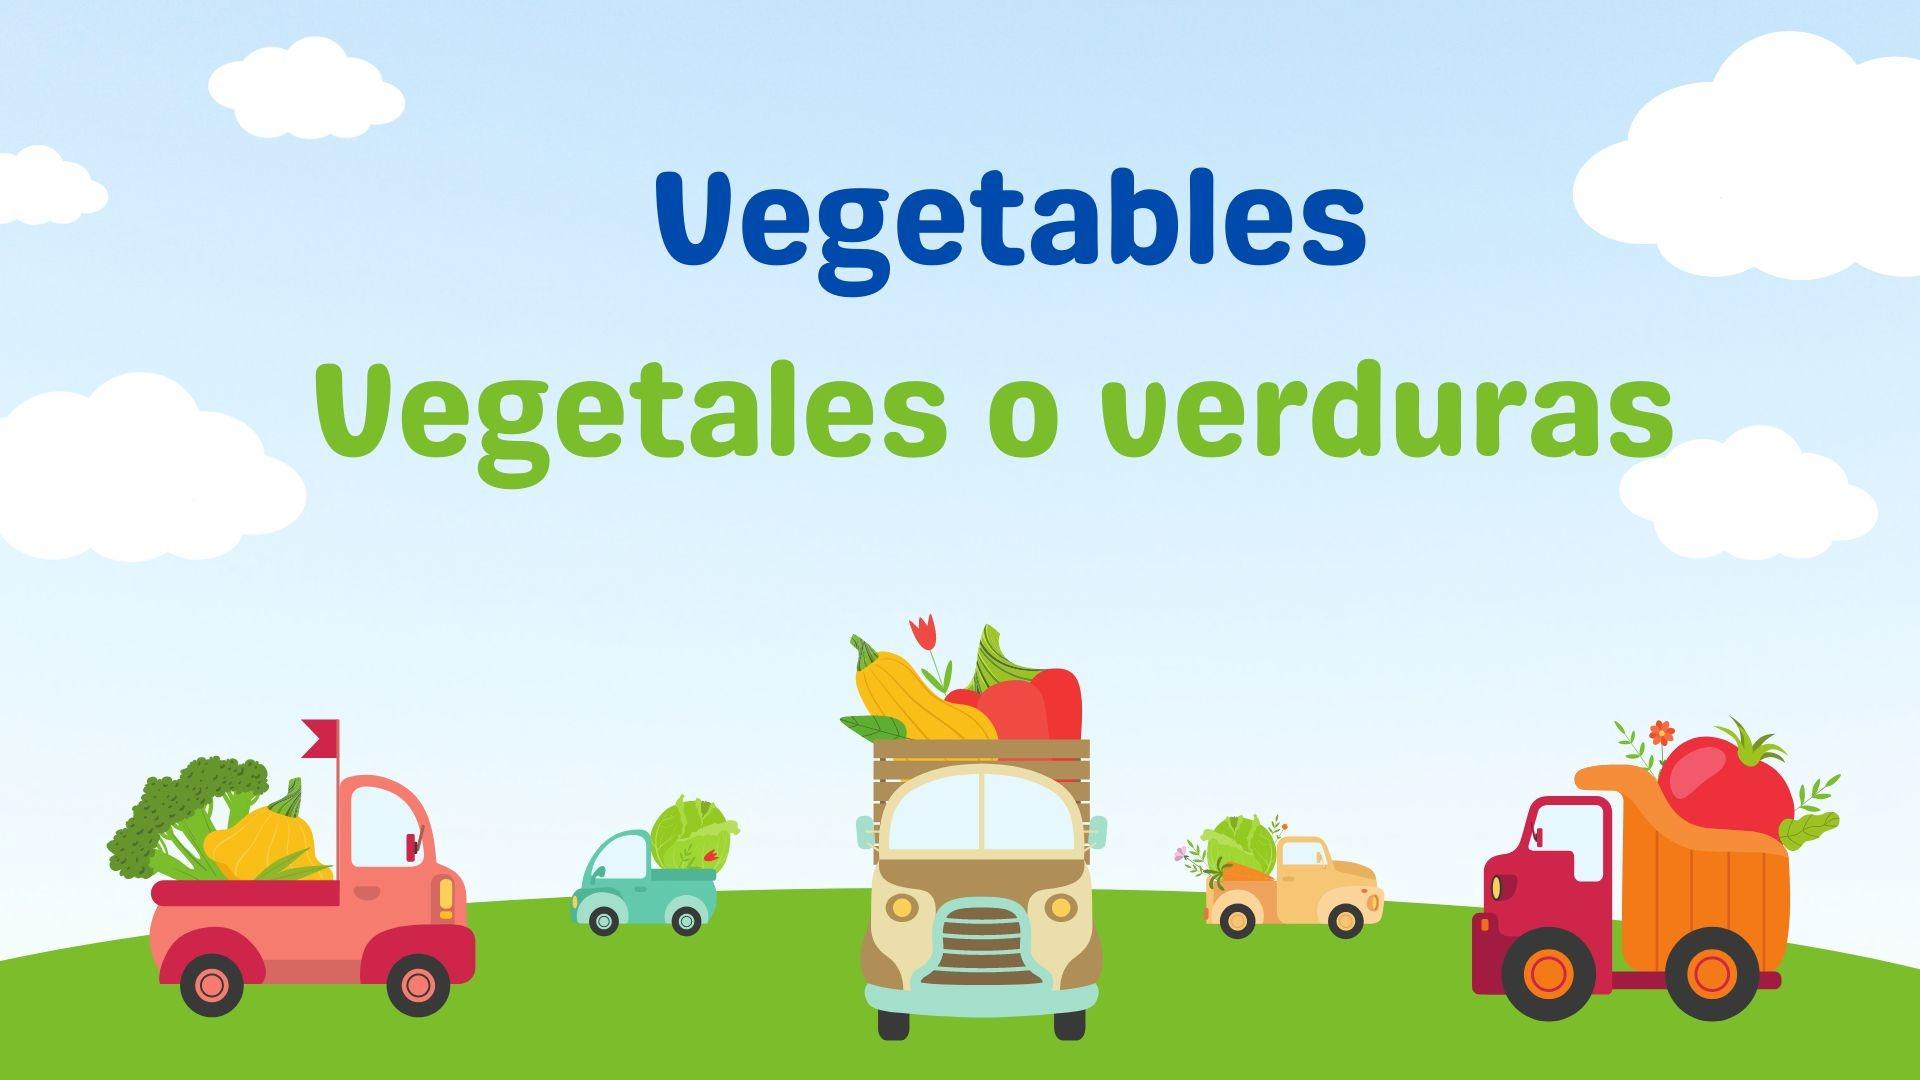 The vegetables in Spanish